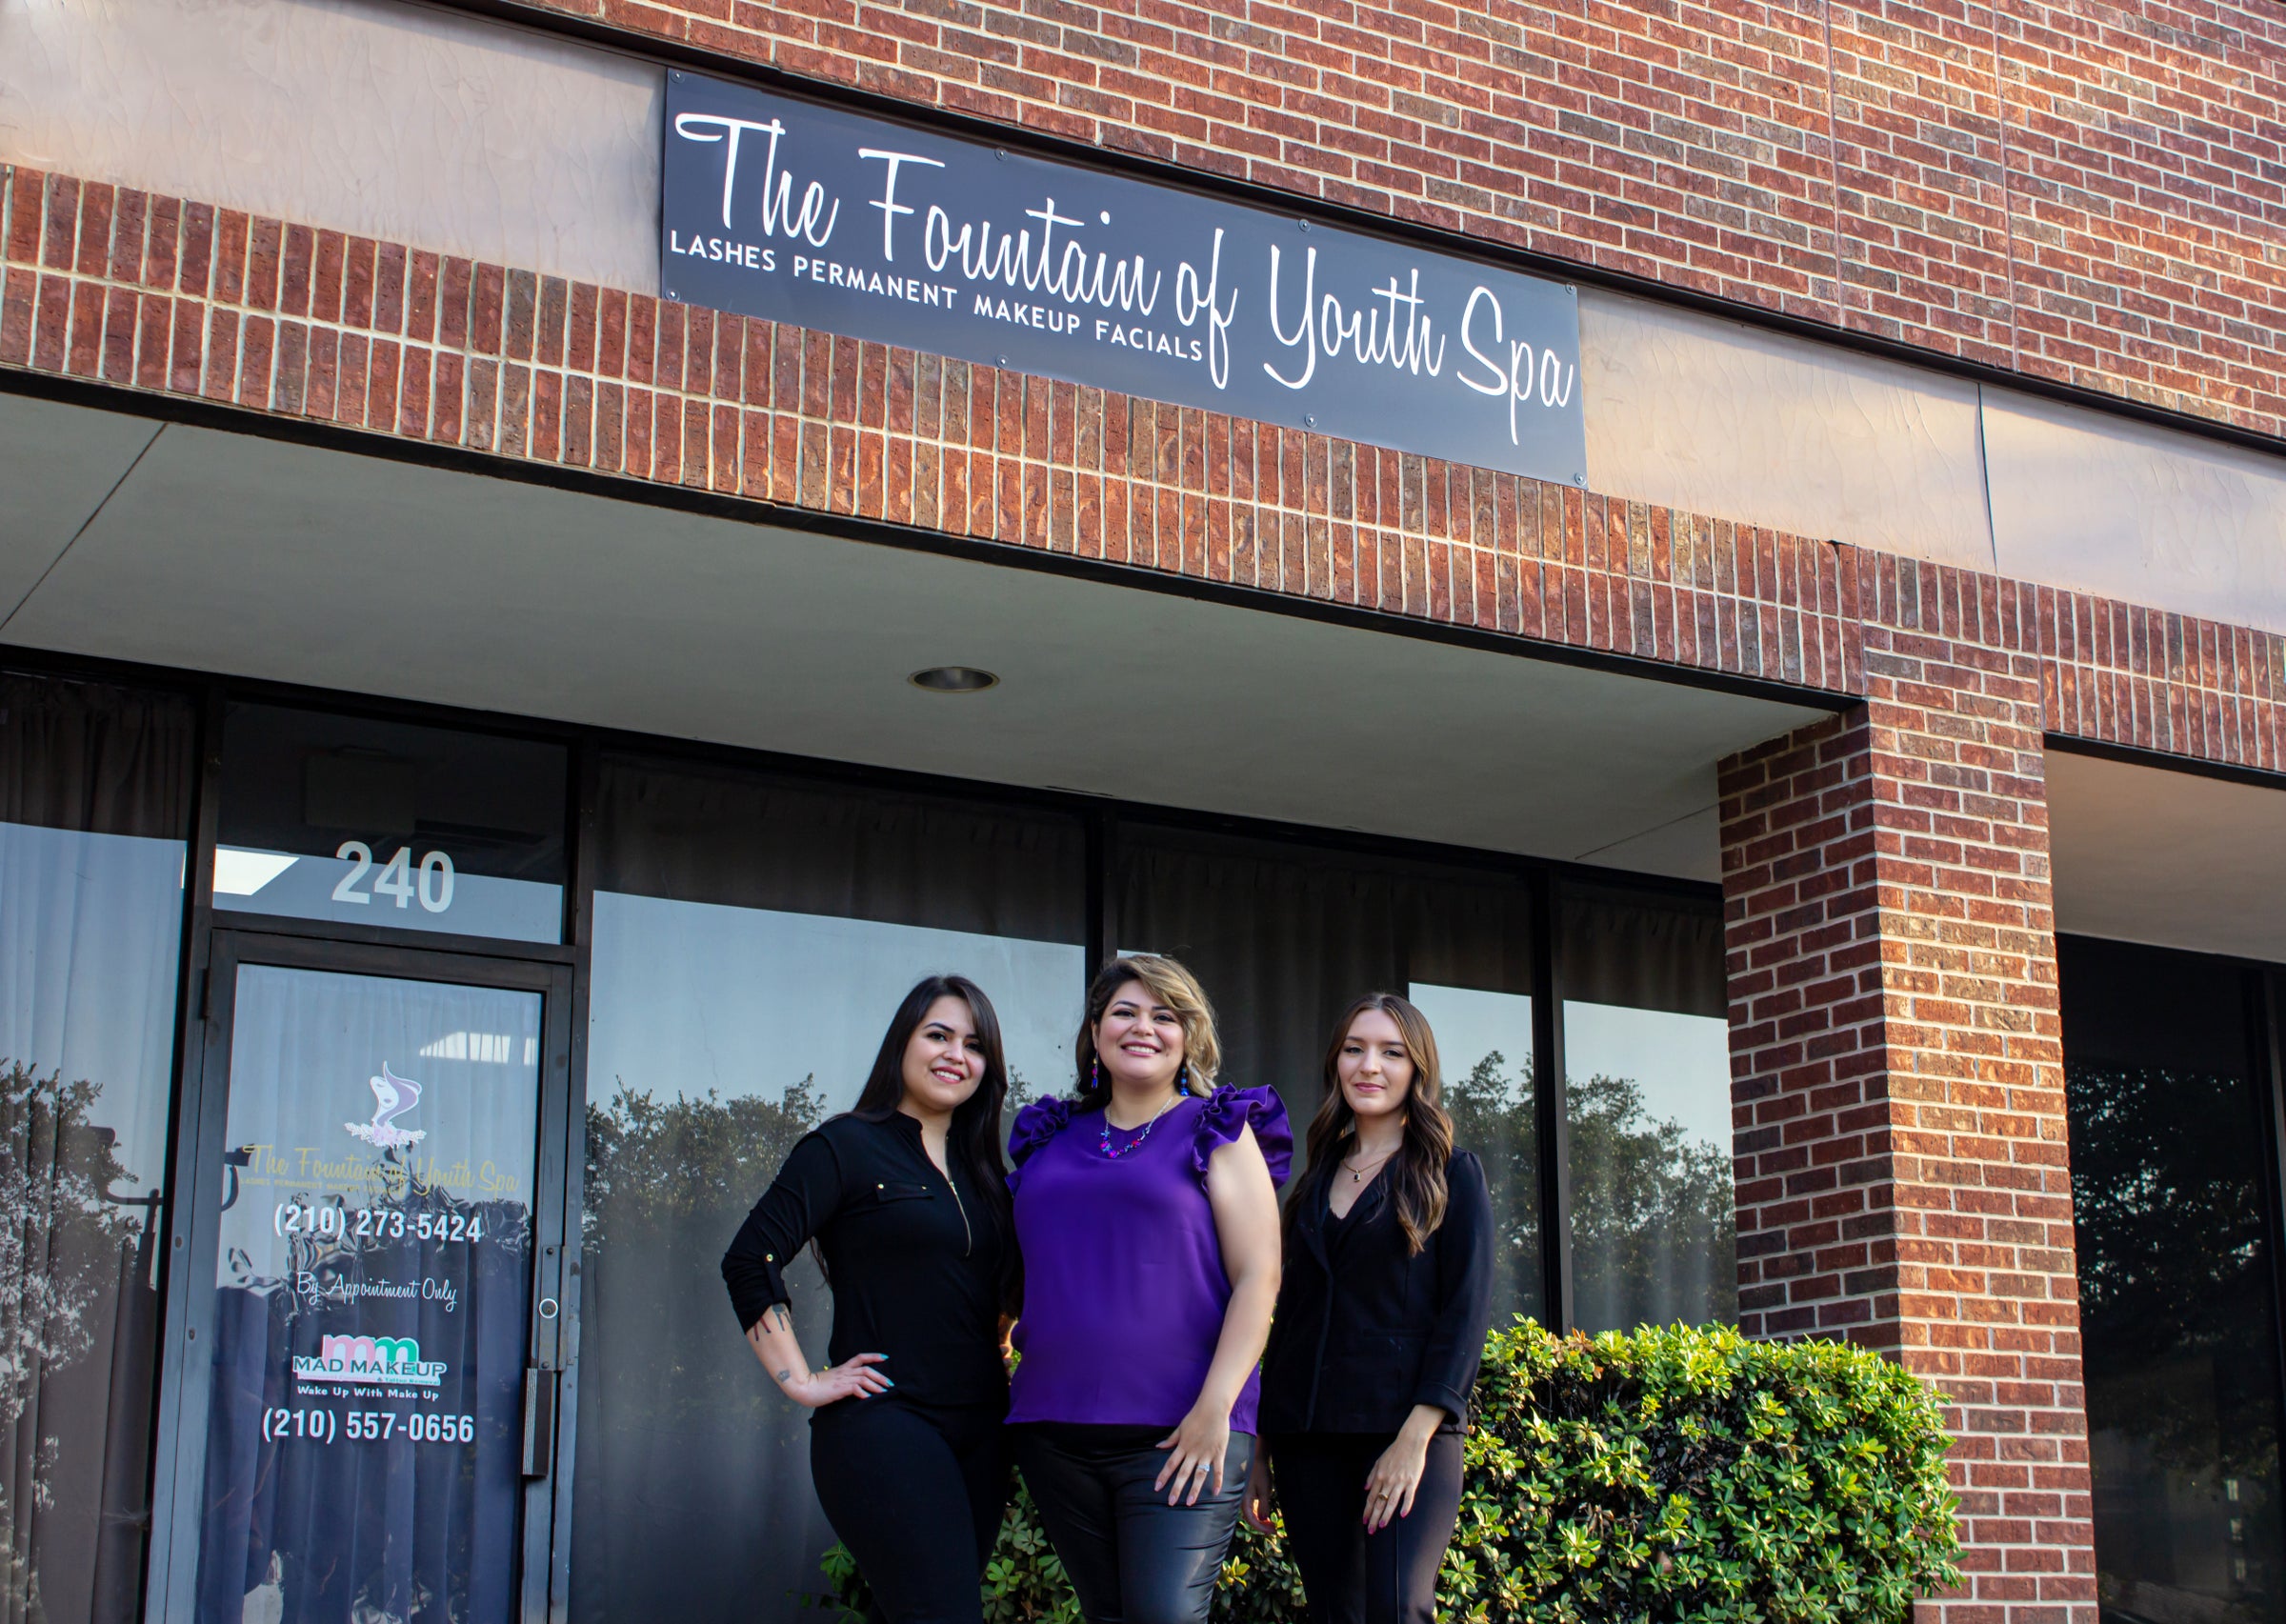 Appointments - The Fountain Spa